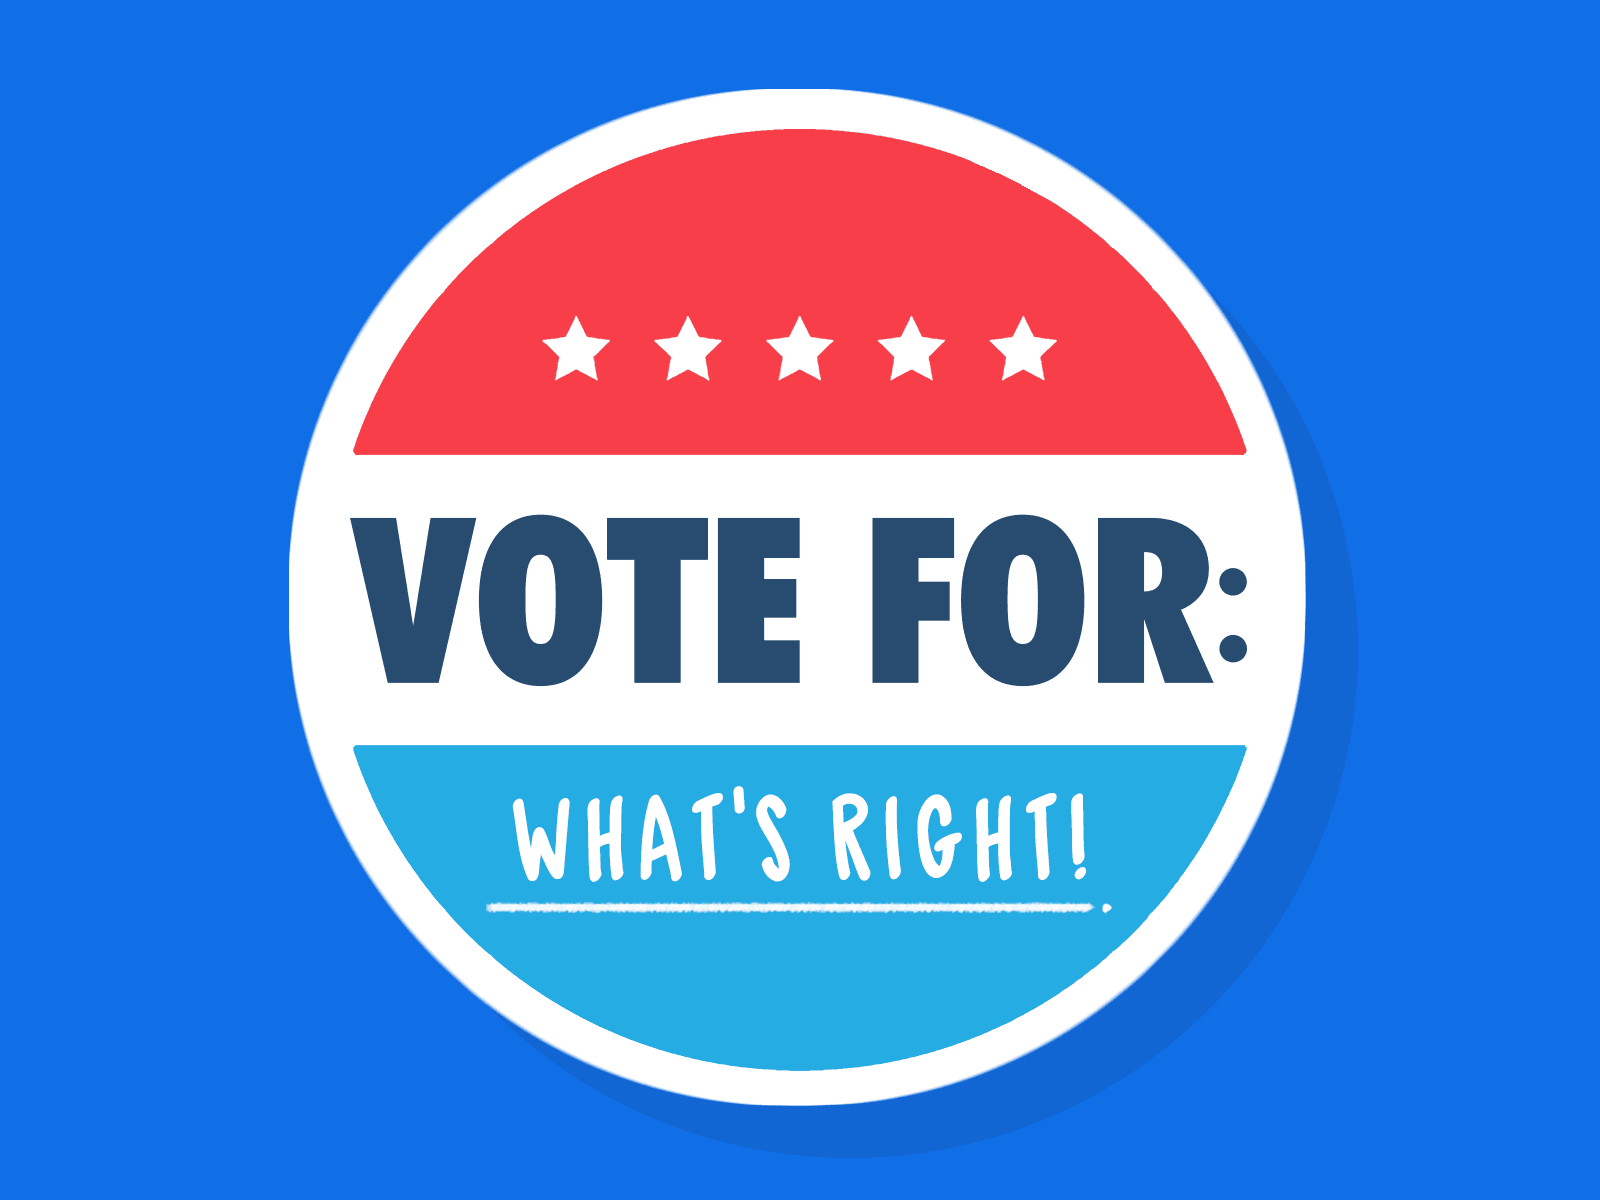 VOTE FOR WHAT'S RIGHT